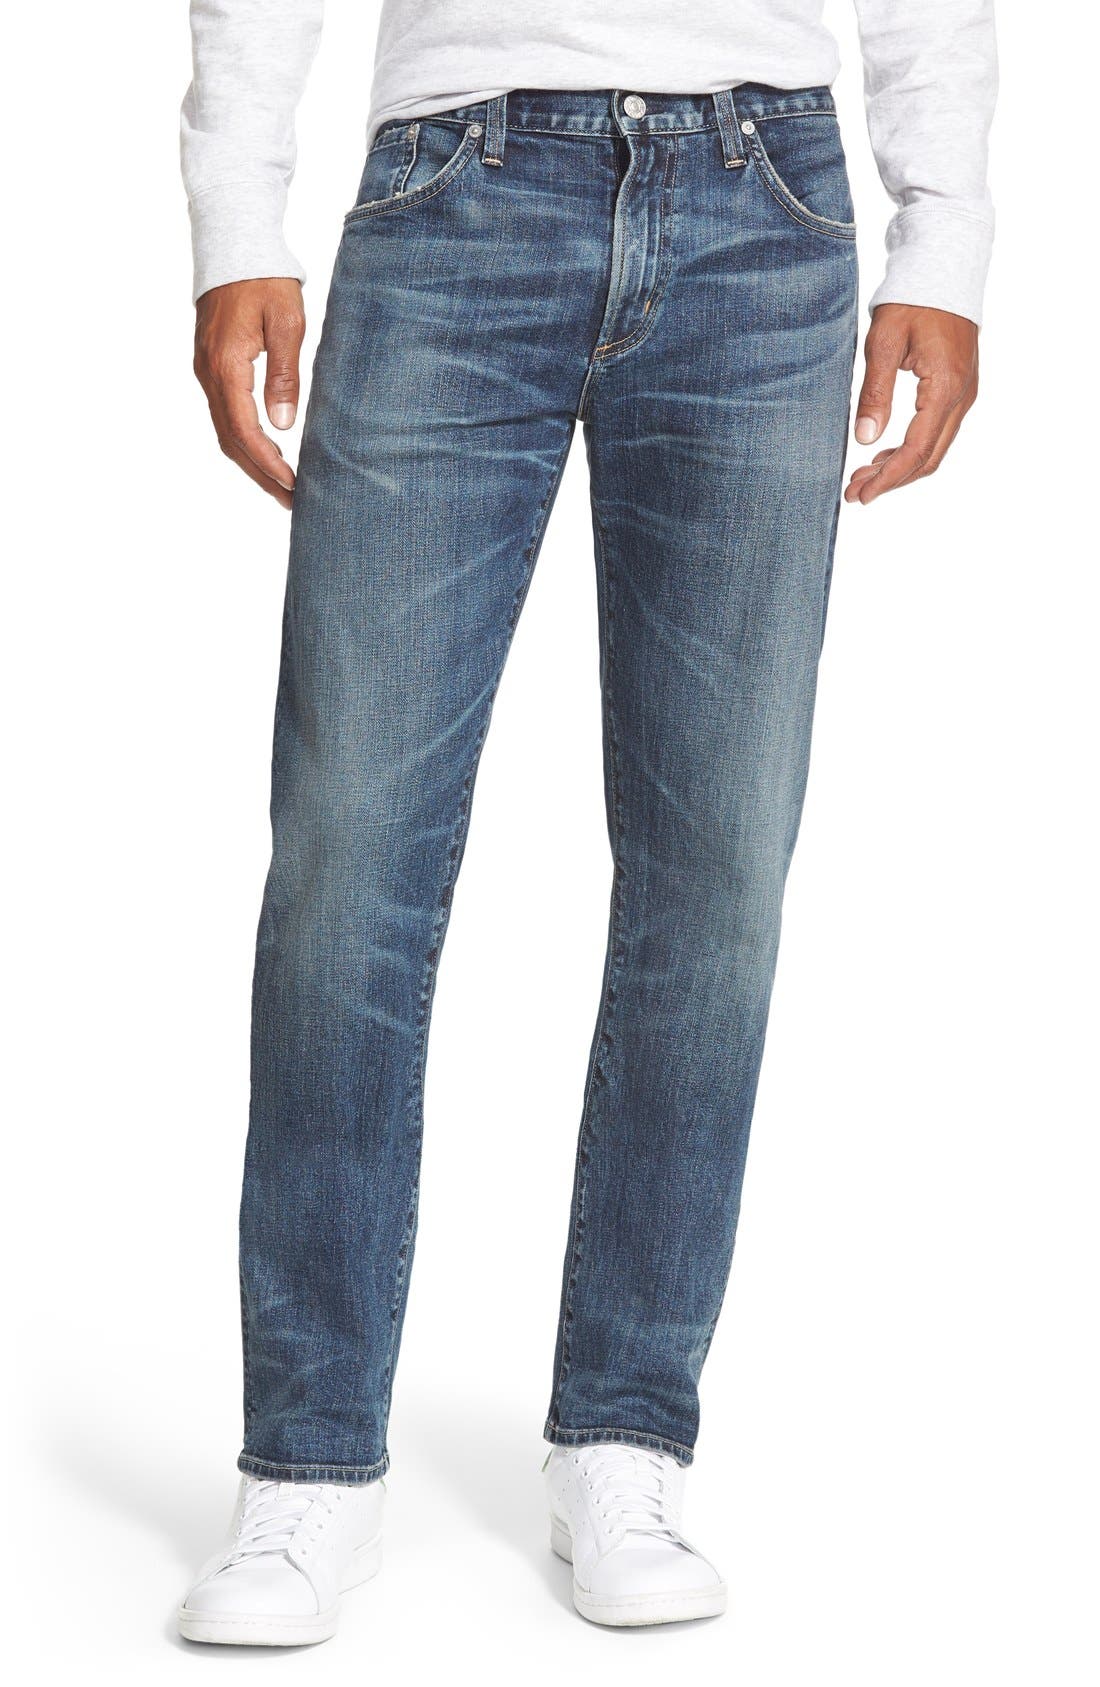 citizens of humanity men's jeans